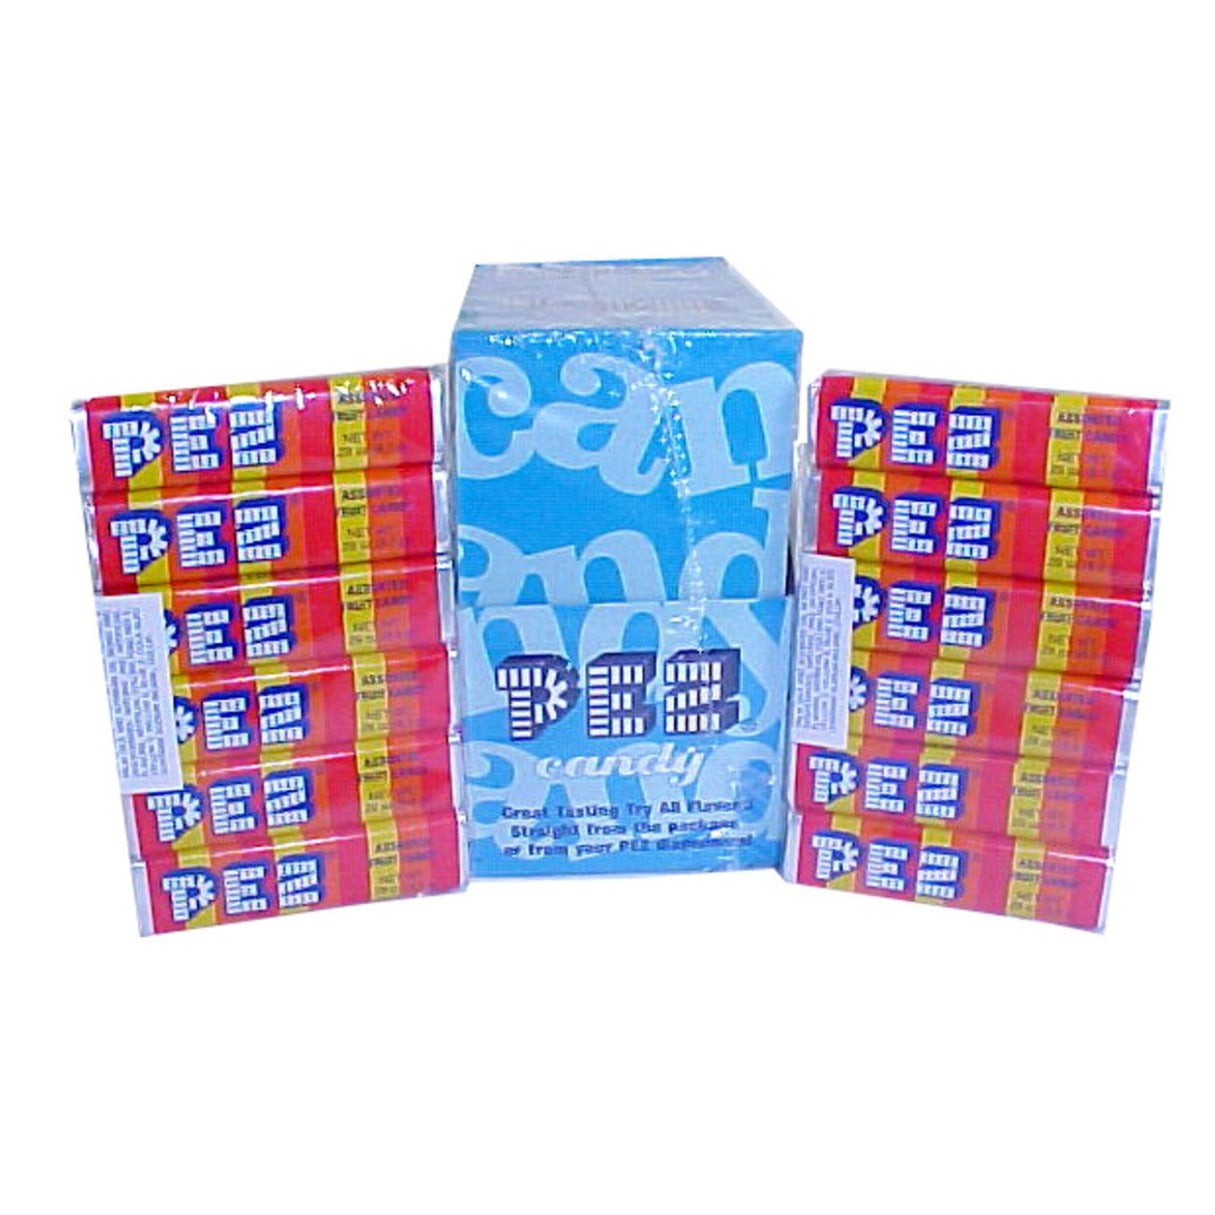 Pez Candy Refills - 12ct